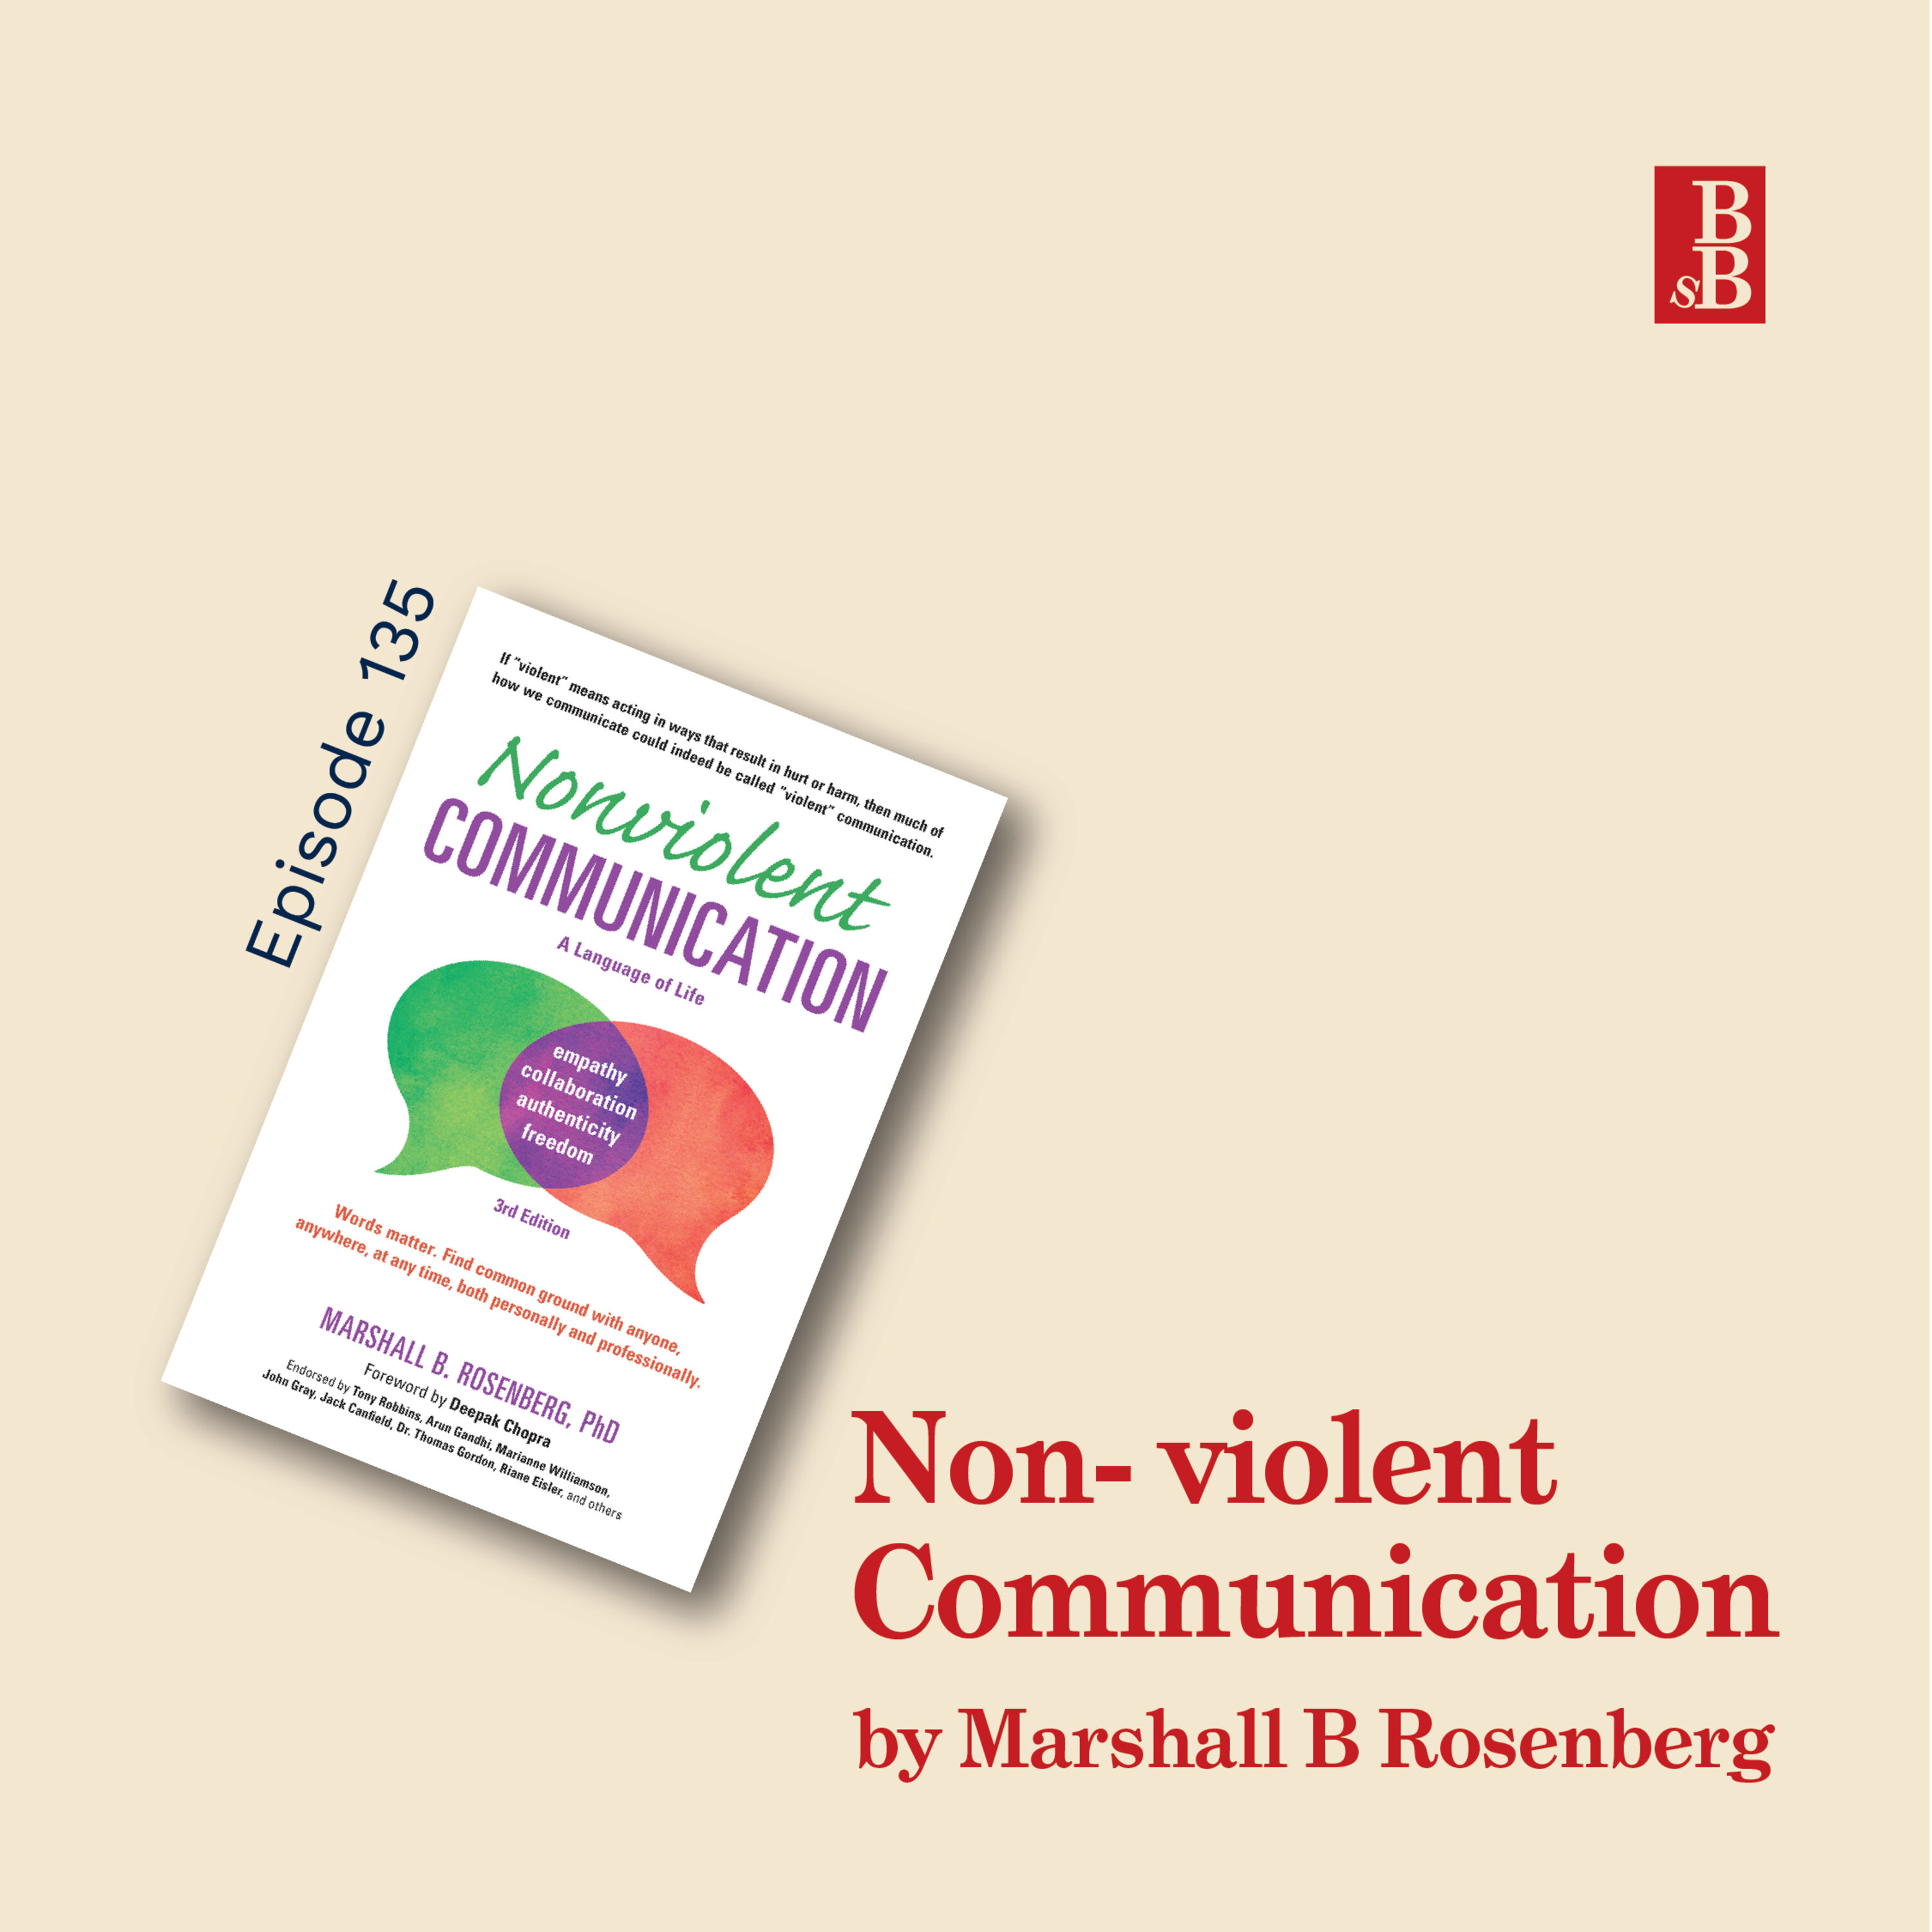 Nonviolent Communication by Marshall B Rosenberg: how to take personal responsibility for your feelings Image